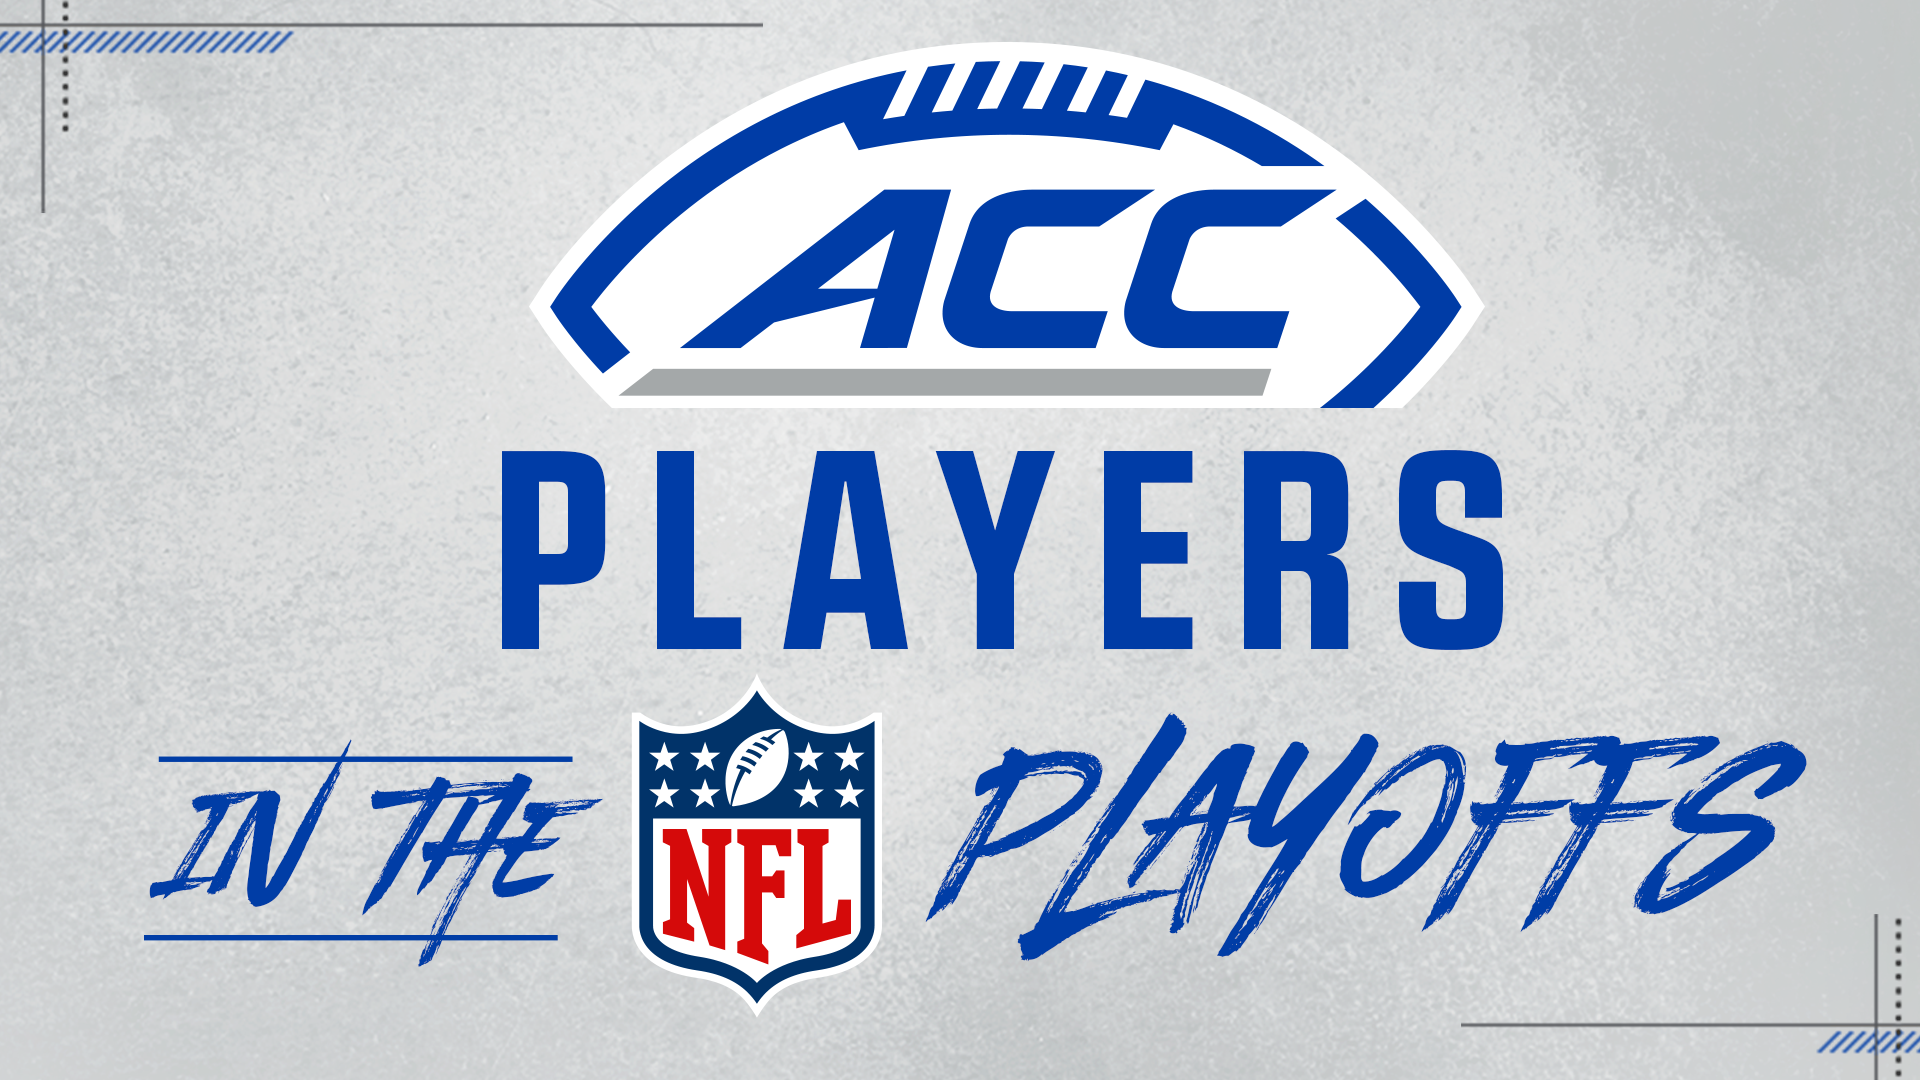 ACC Players in the NFL Playoffs Coast Conference